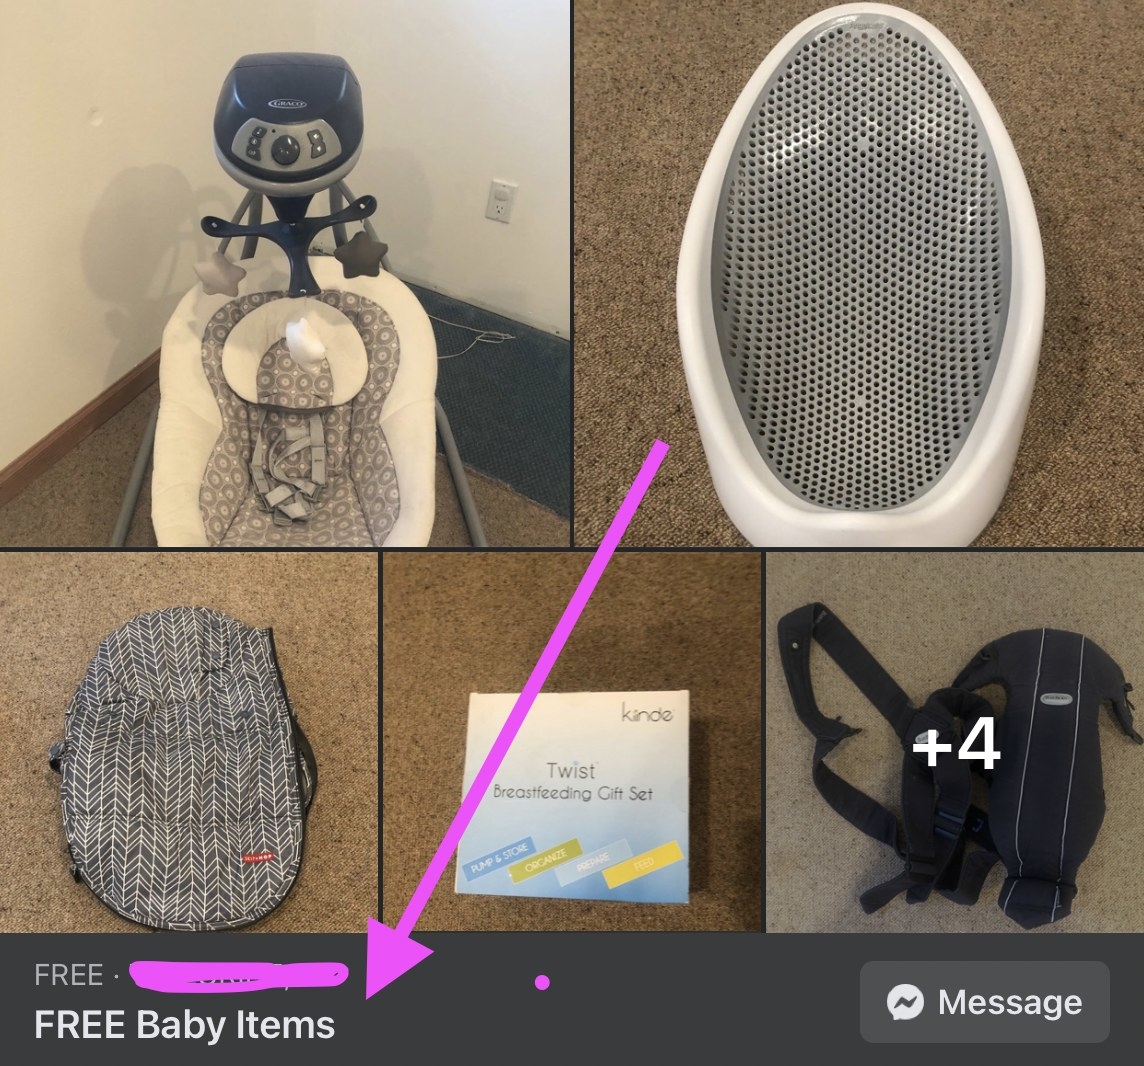 Screenshot of free baby items available